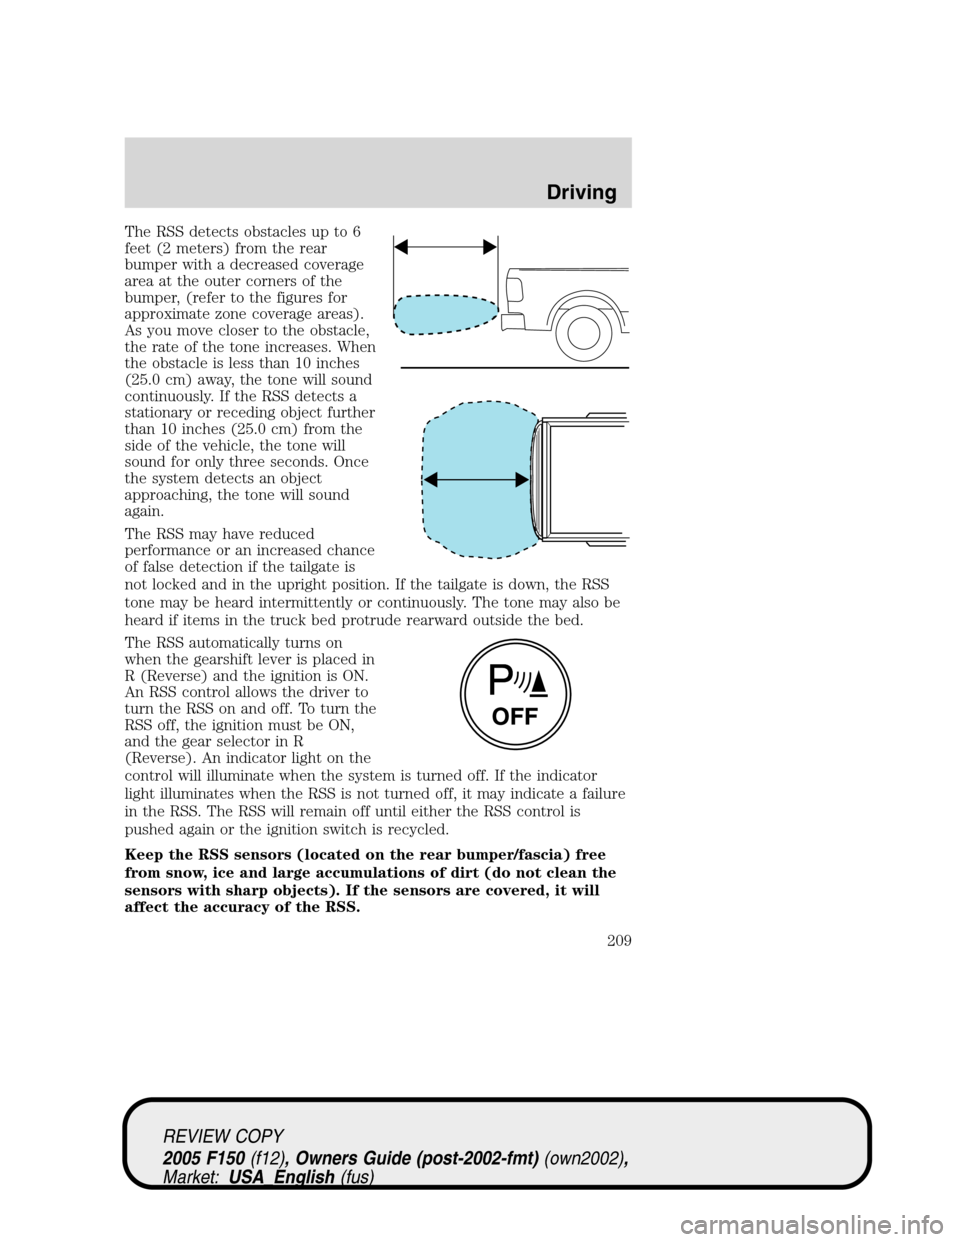 FORD F150 2005 11.G Owners Manual The RSS detects obstacles up to 6
feet (2 meters) from the rear
bumper with a decreased coverage
area at the outer corners of the
bumper, (refer to the figures for
approximate zone coverage areas).
As